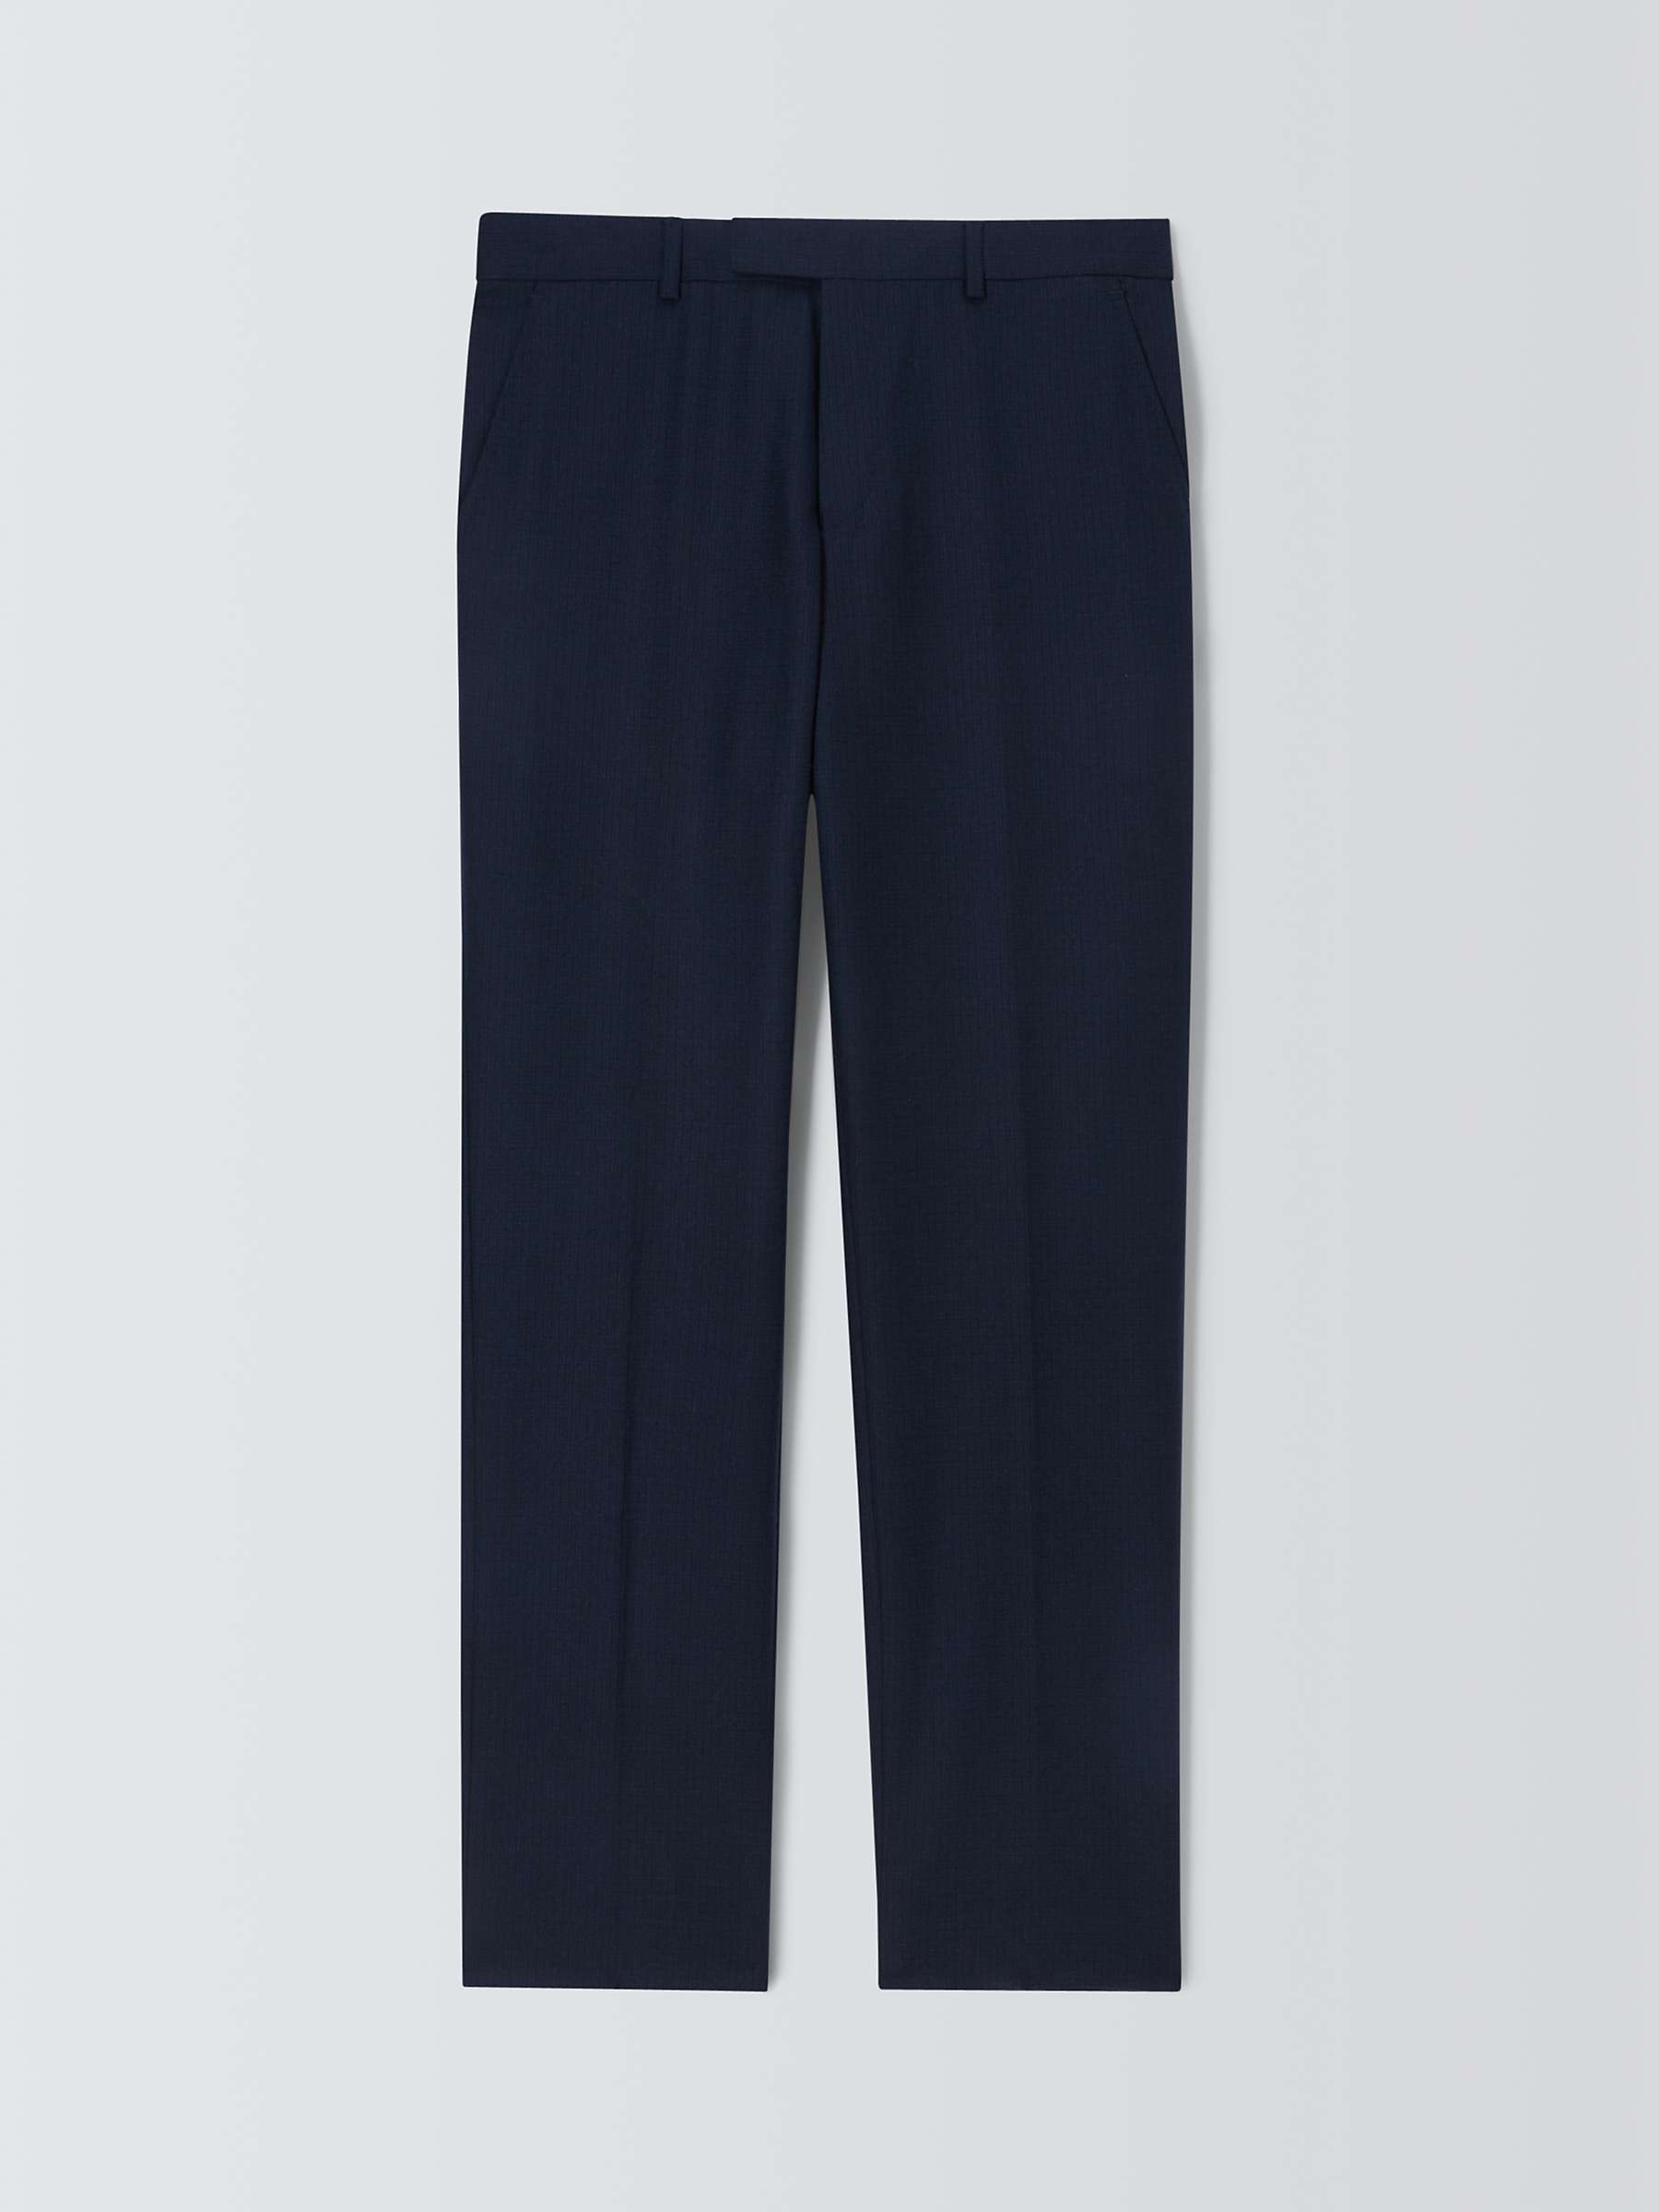 John Lewis Zegna Recycled Wool Regular Fit Suit Trousers, Navy at John ...